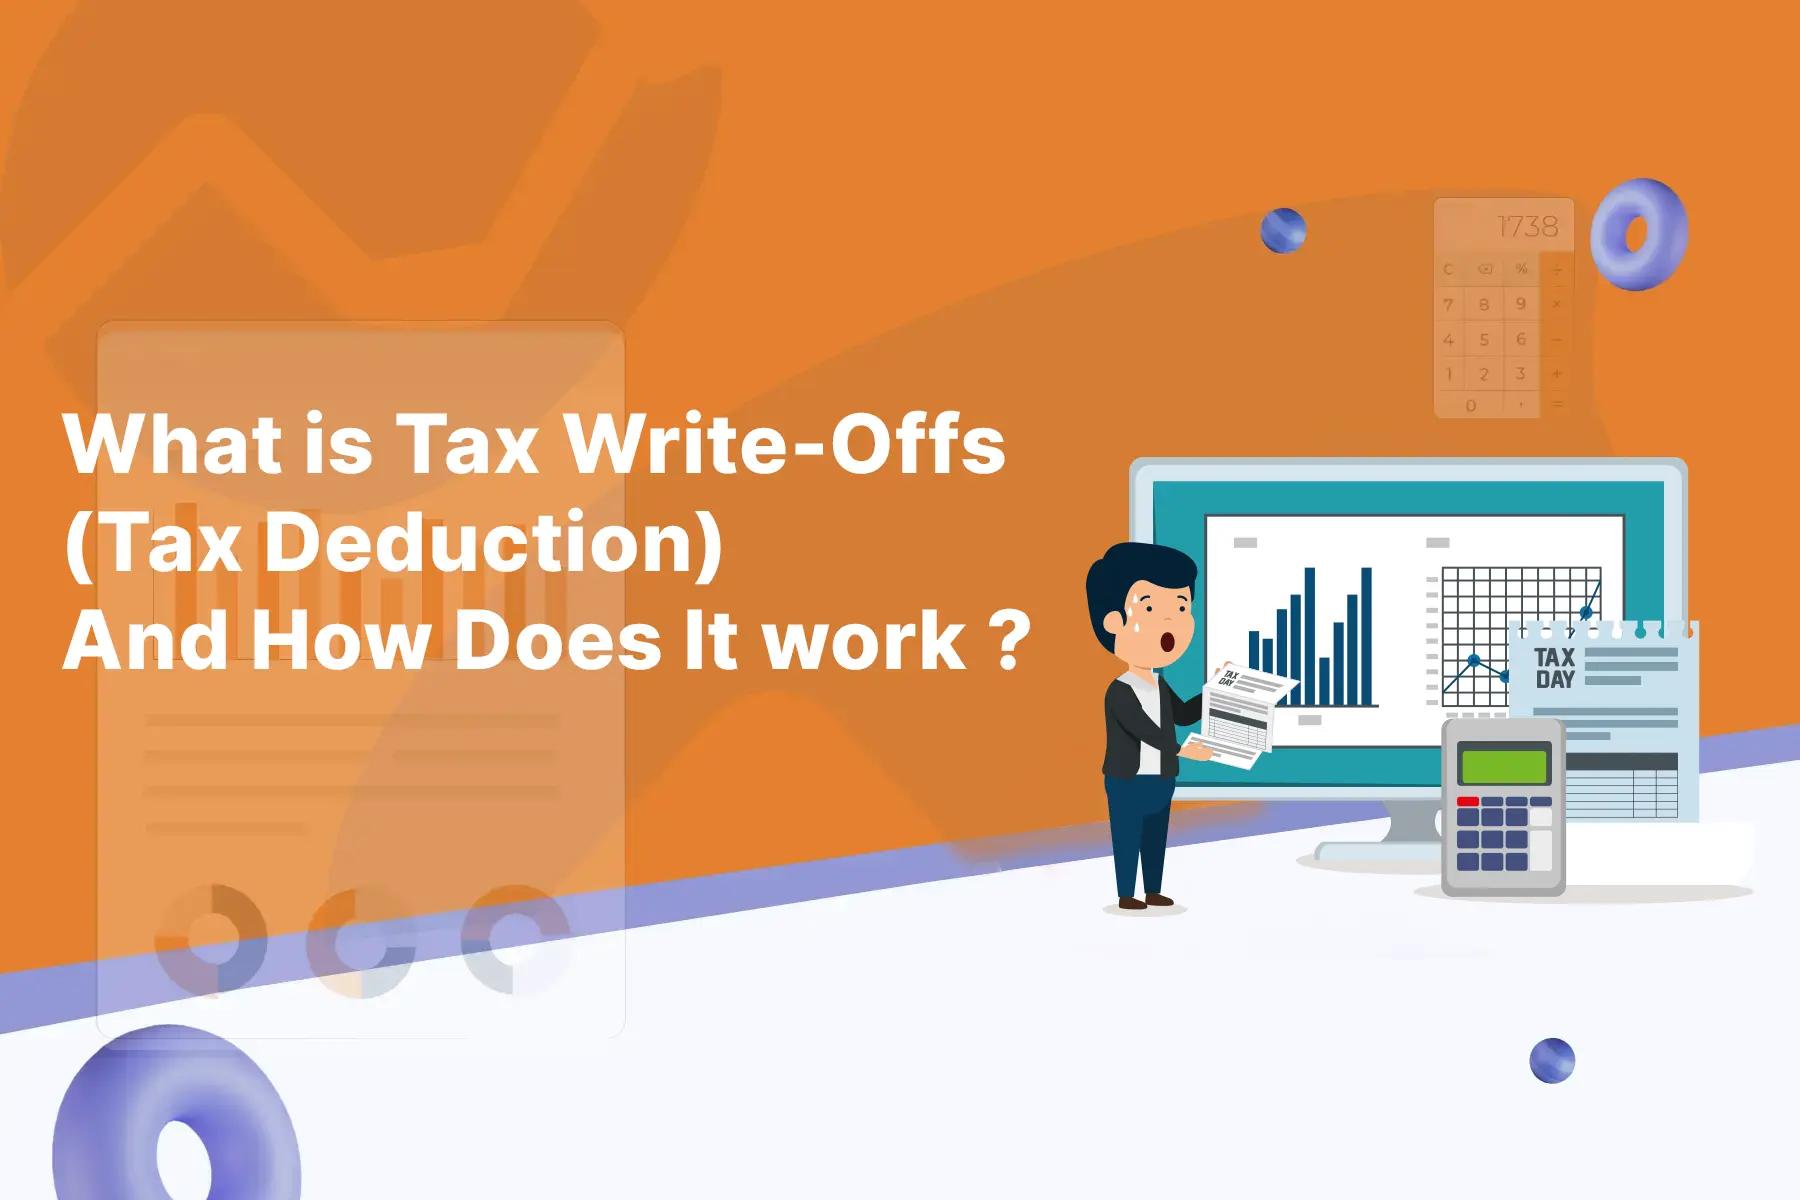 What is Tax Write-Offs (Tax Deduction) And How Does It work?